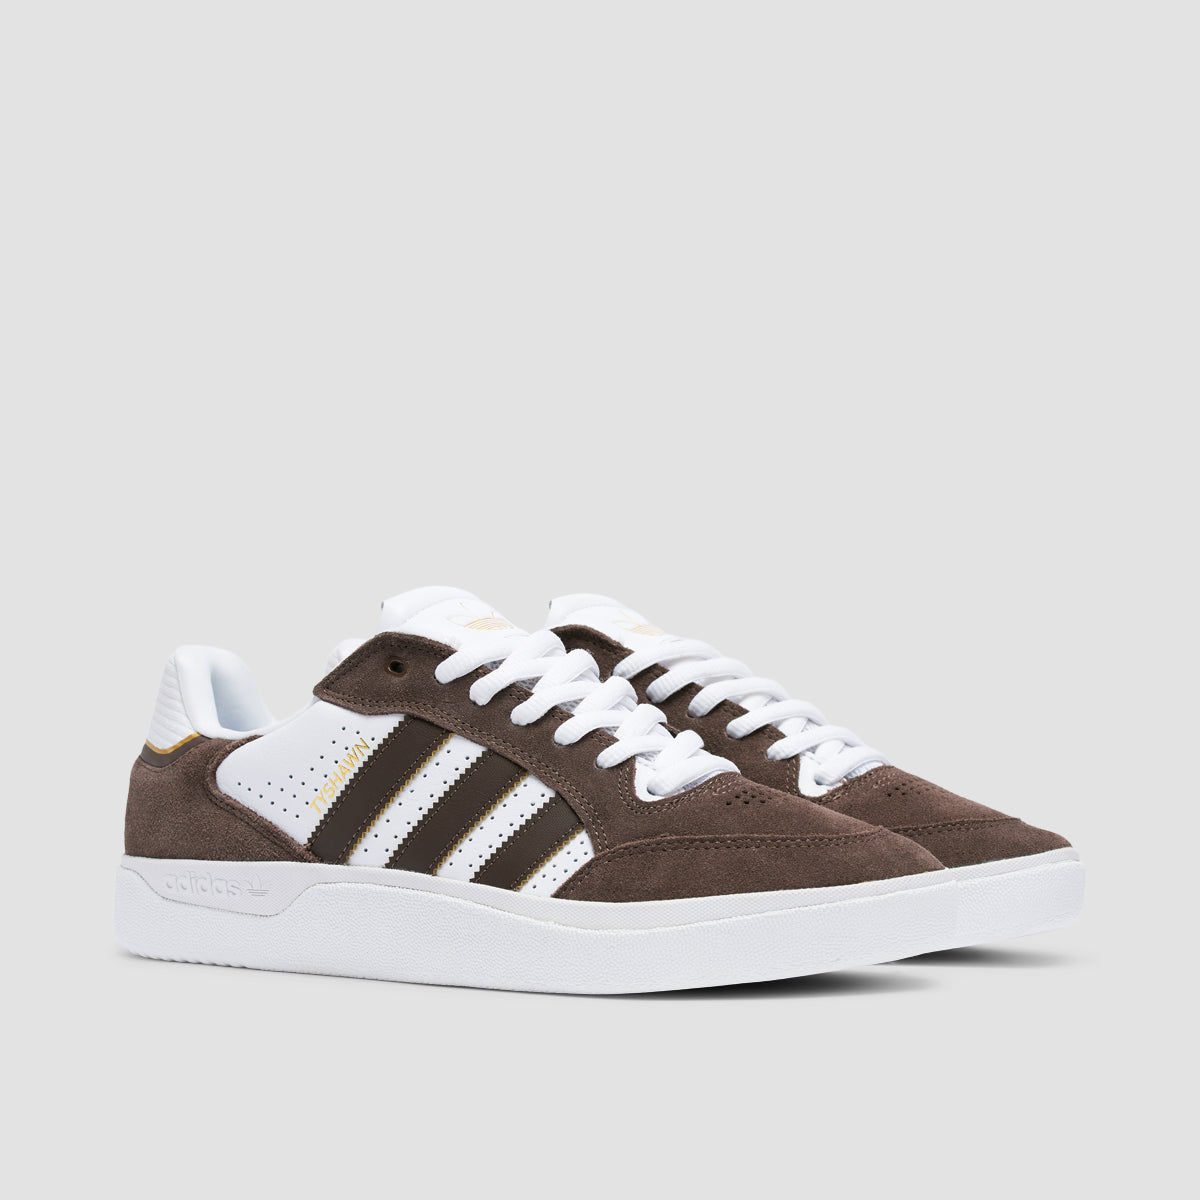 adidas Tyshawn Low Shoes - Brown/Ftwr White/Gold Met